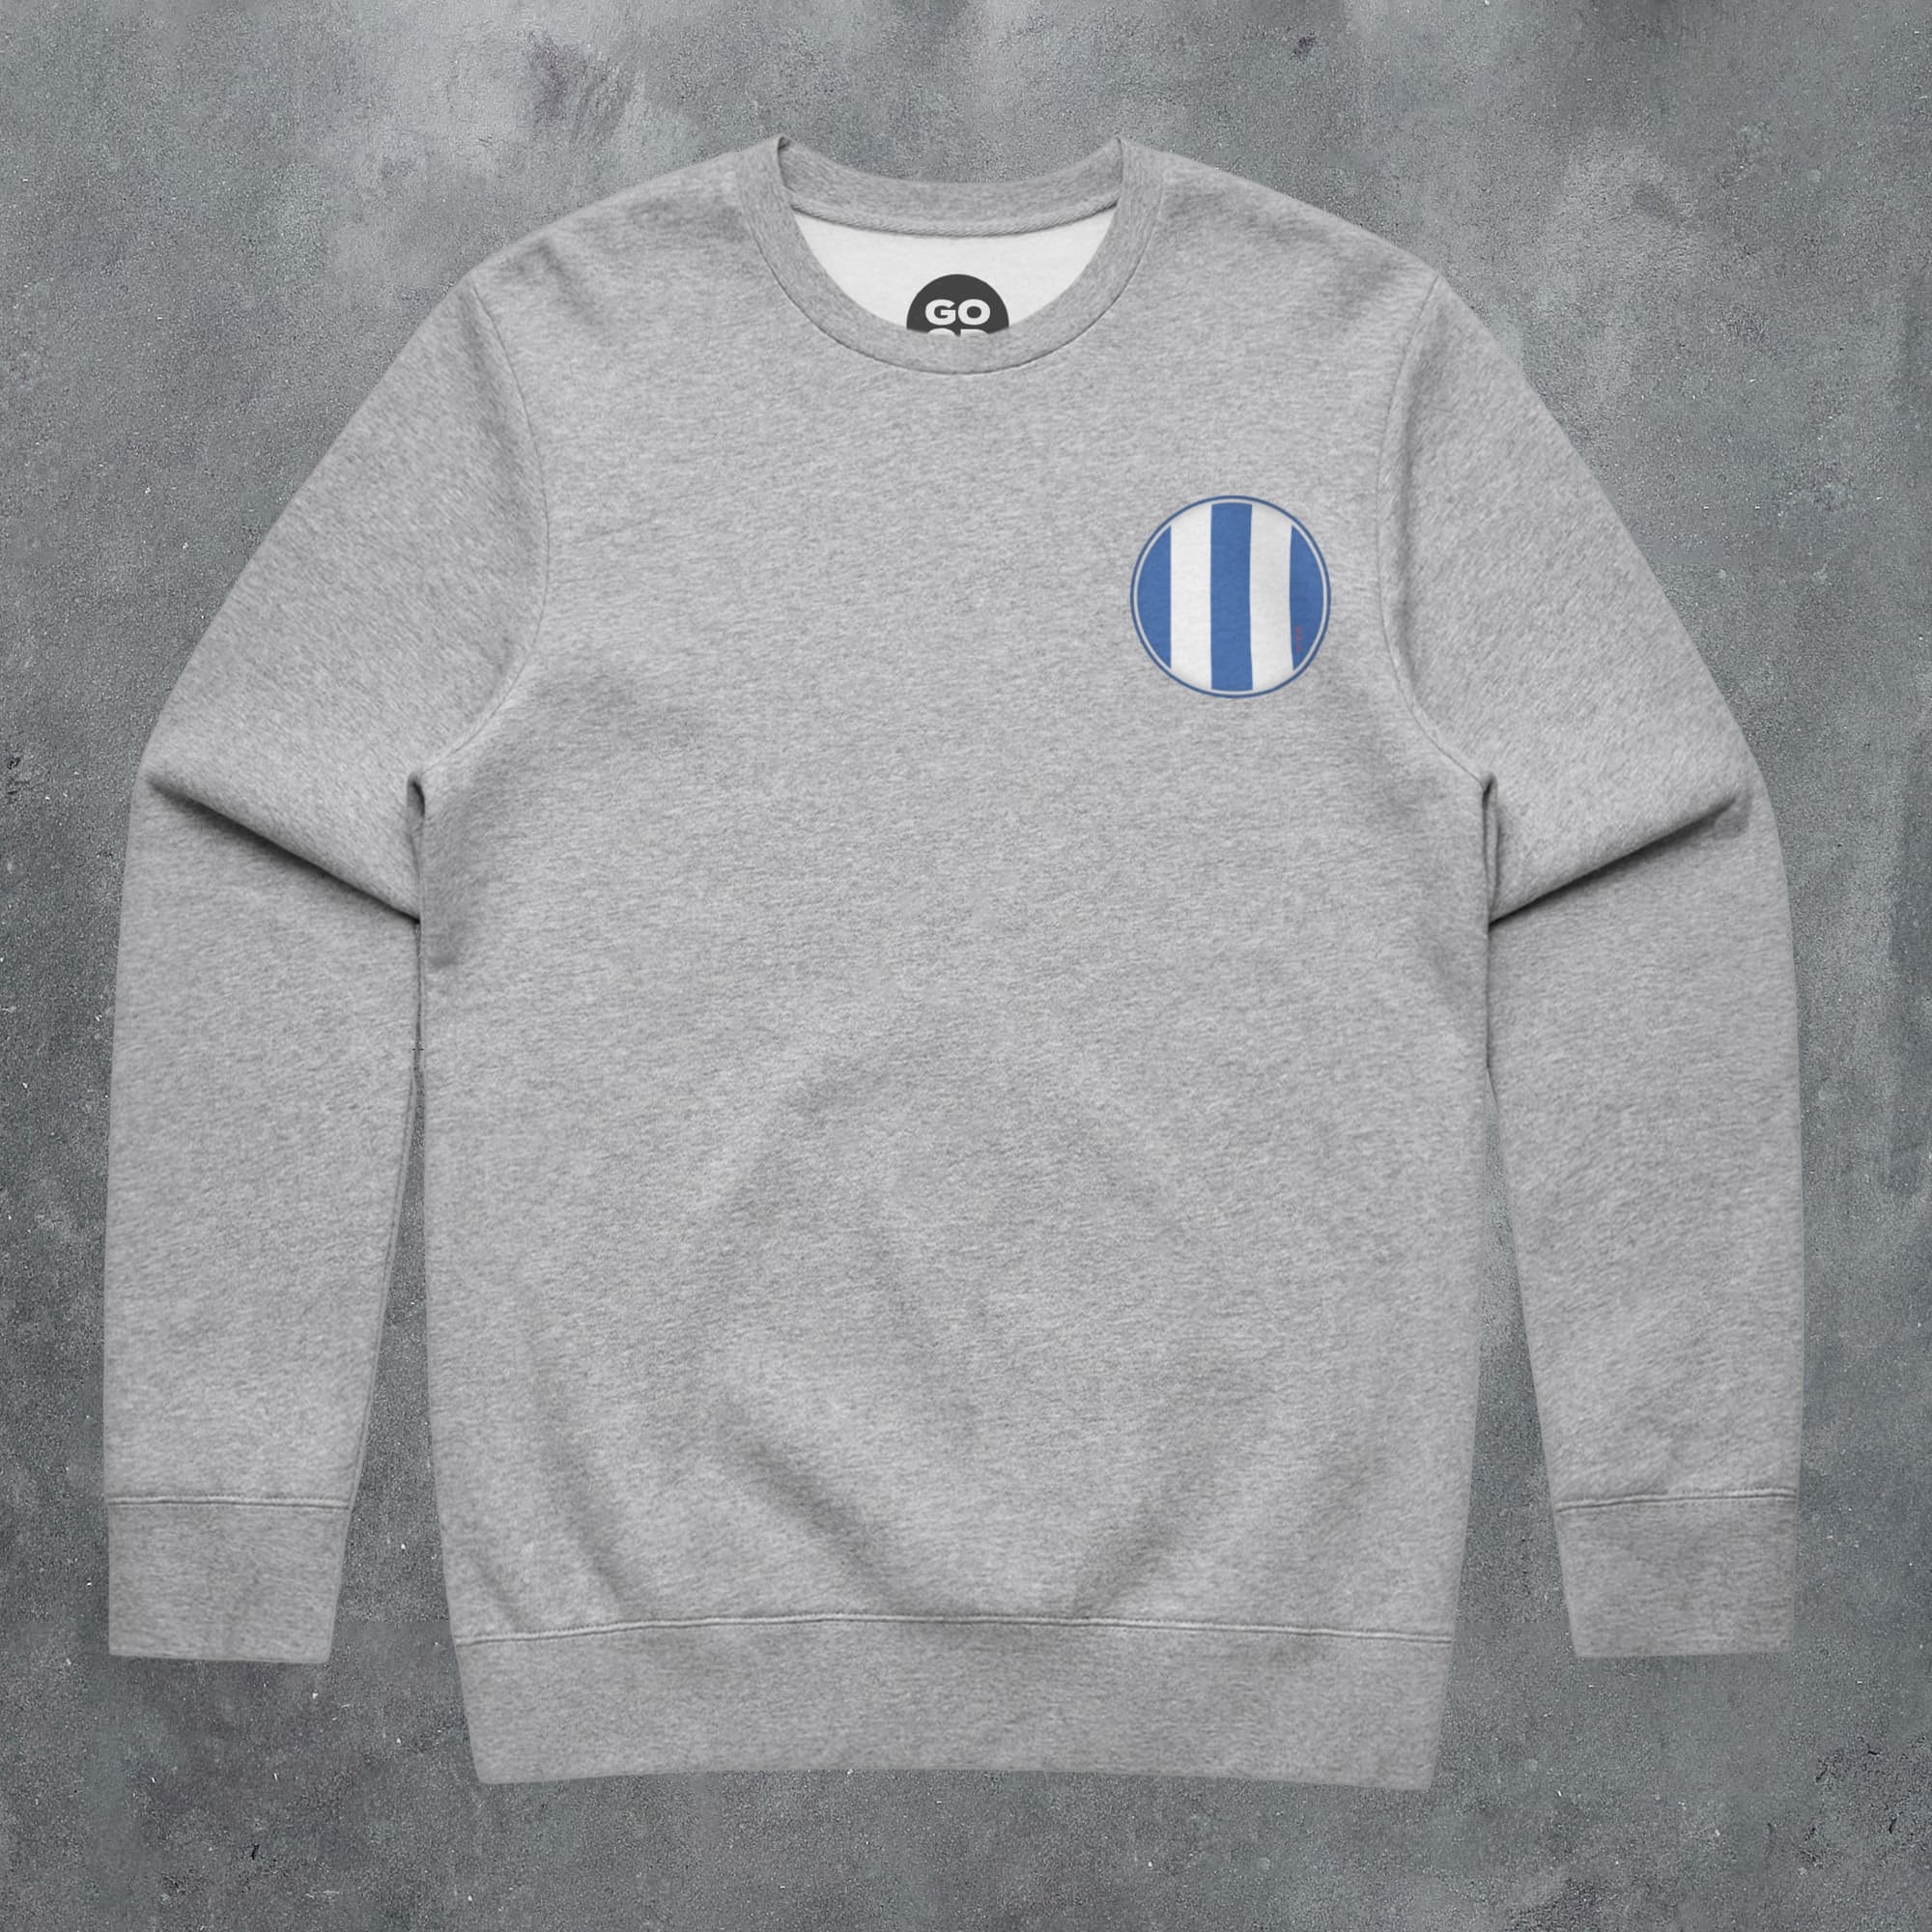 a grey sweatshirt with a blue and white stripe on the chest